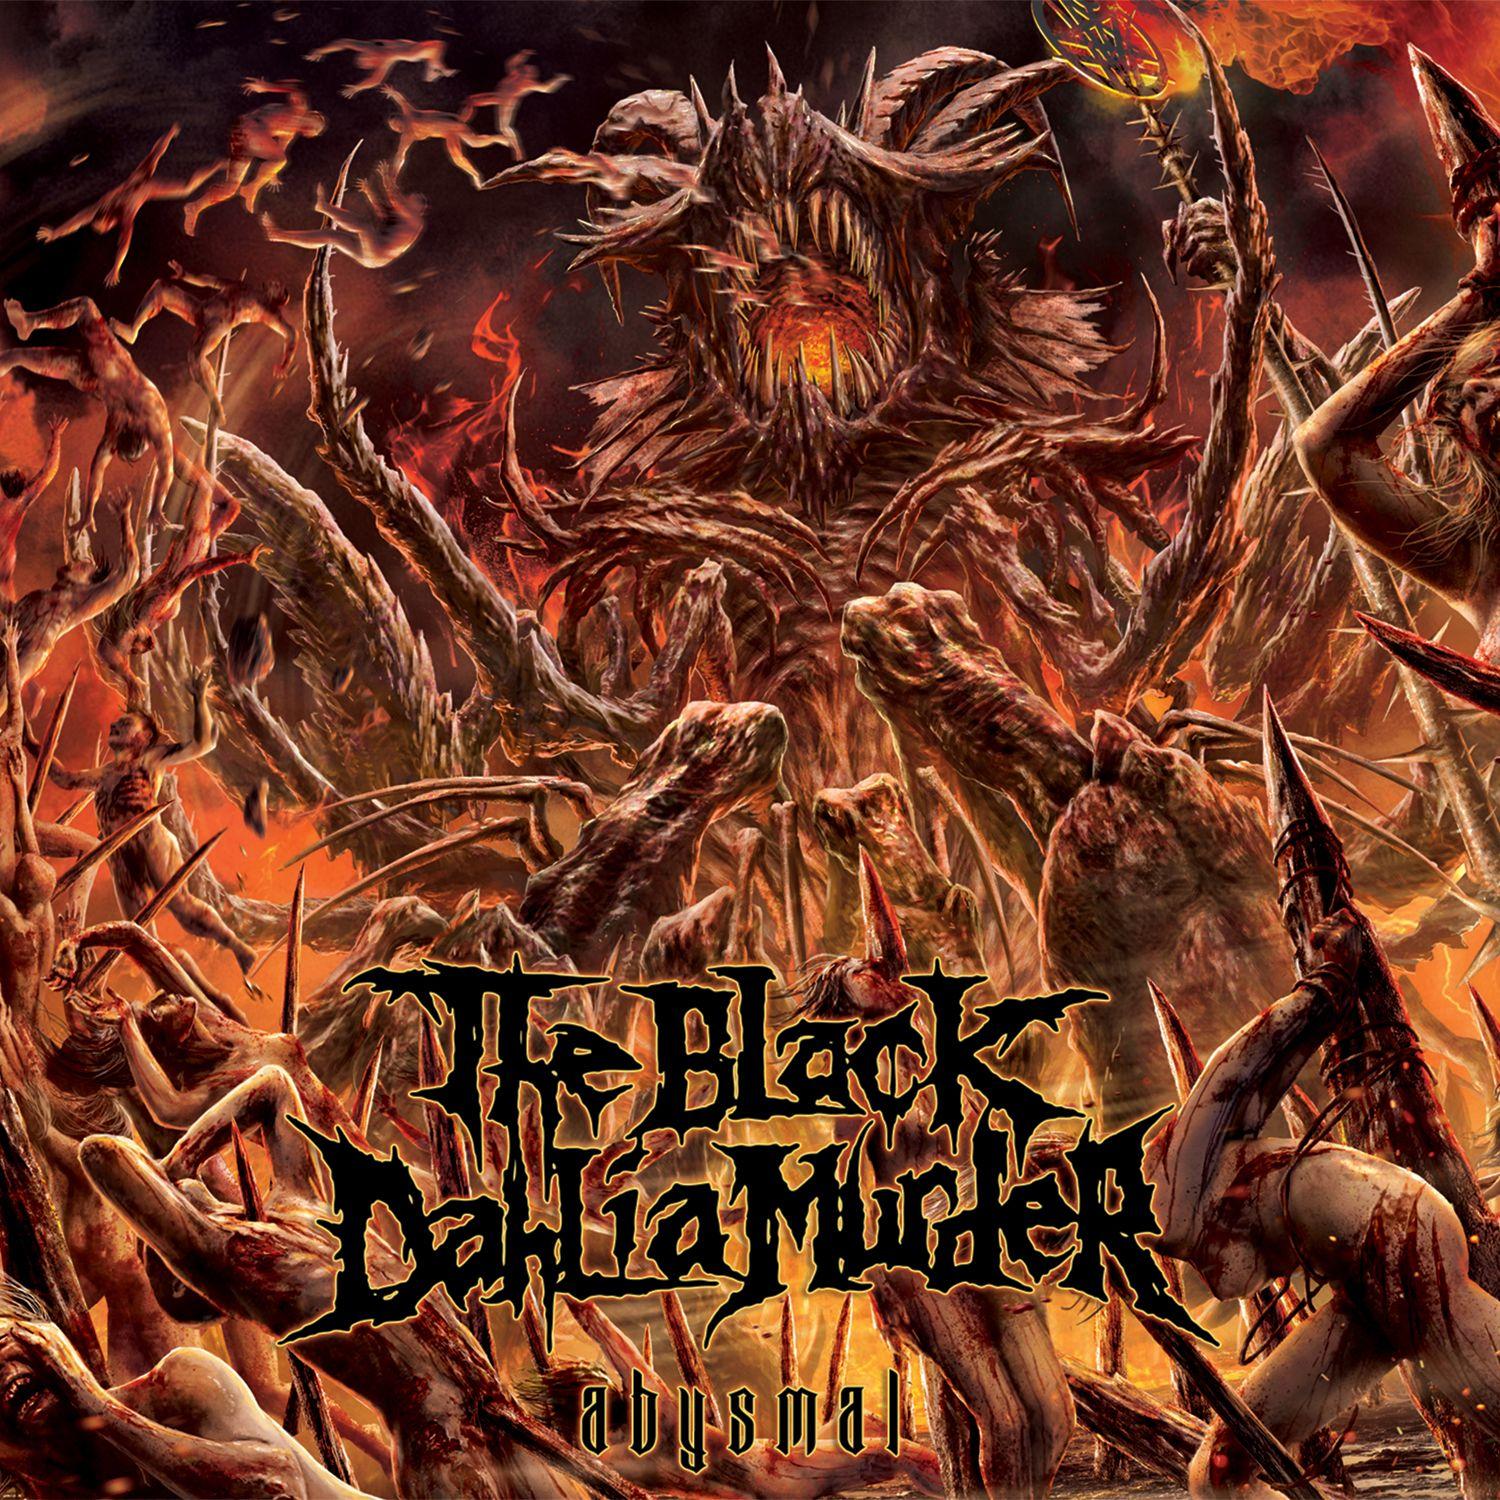 The Black Dahlia Murder's Officially Announce New Album, Abysmal